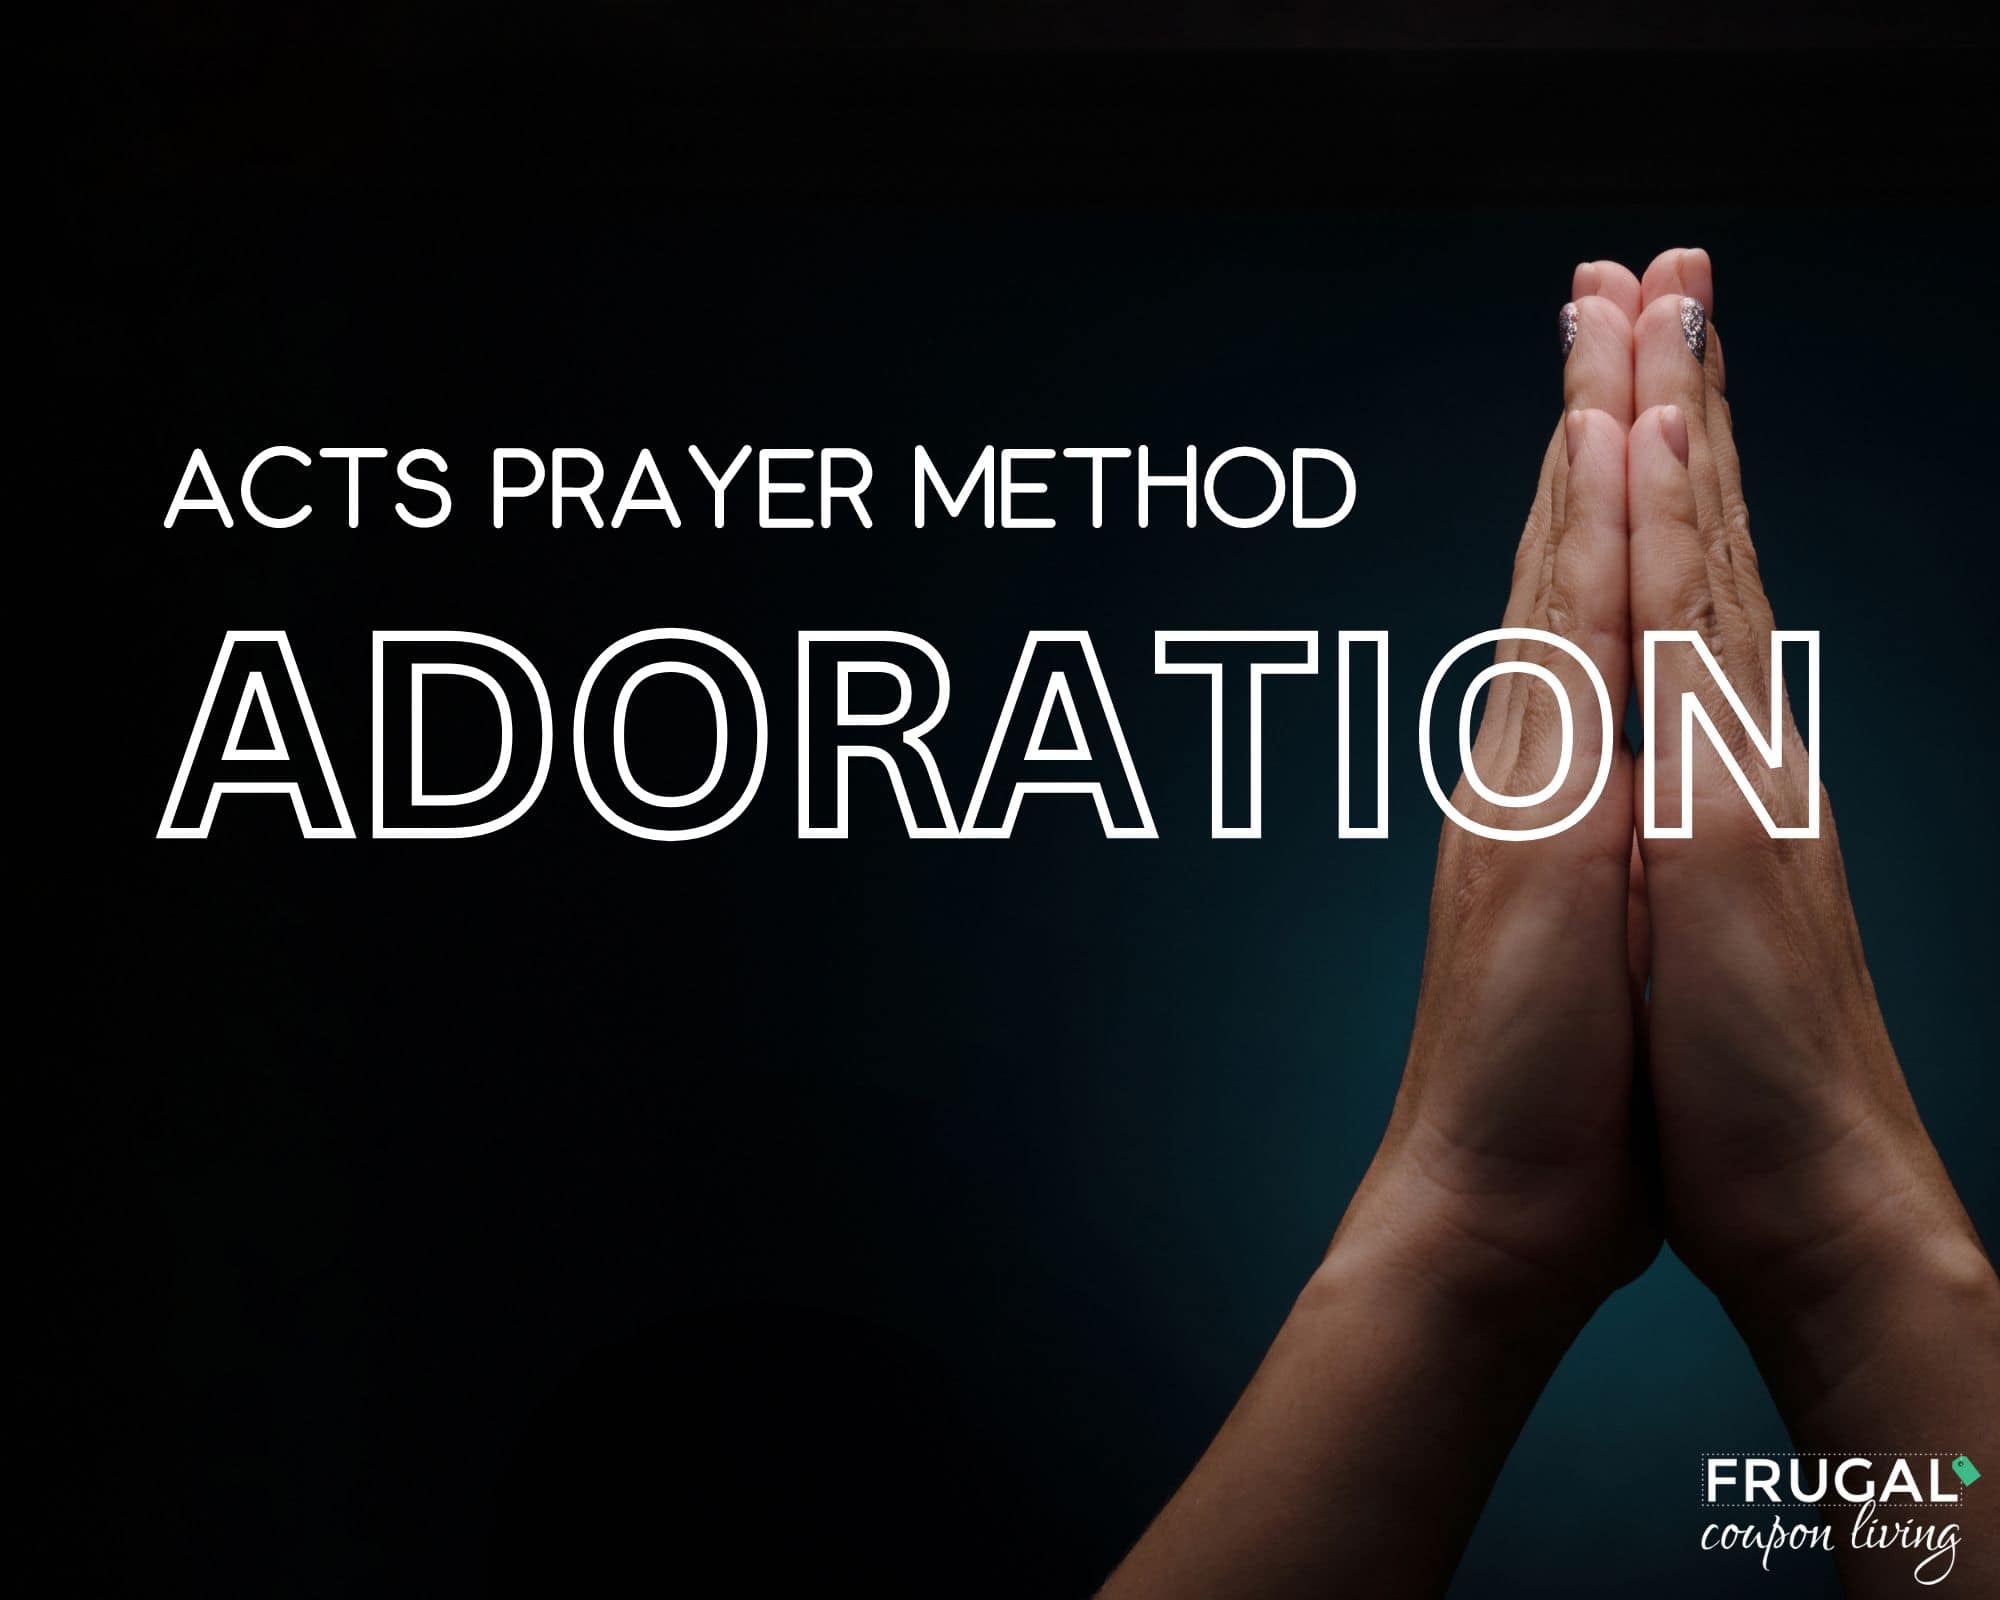 Adoration Part of Acts Prayer